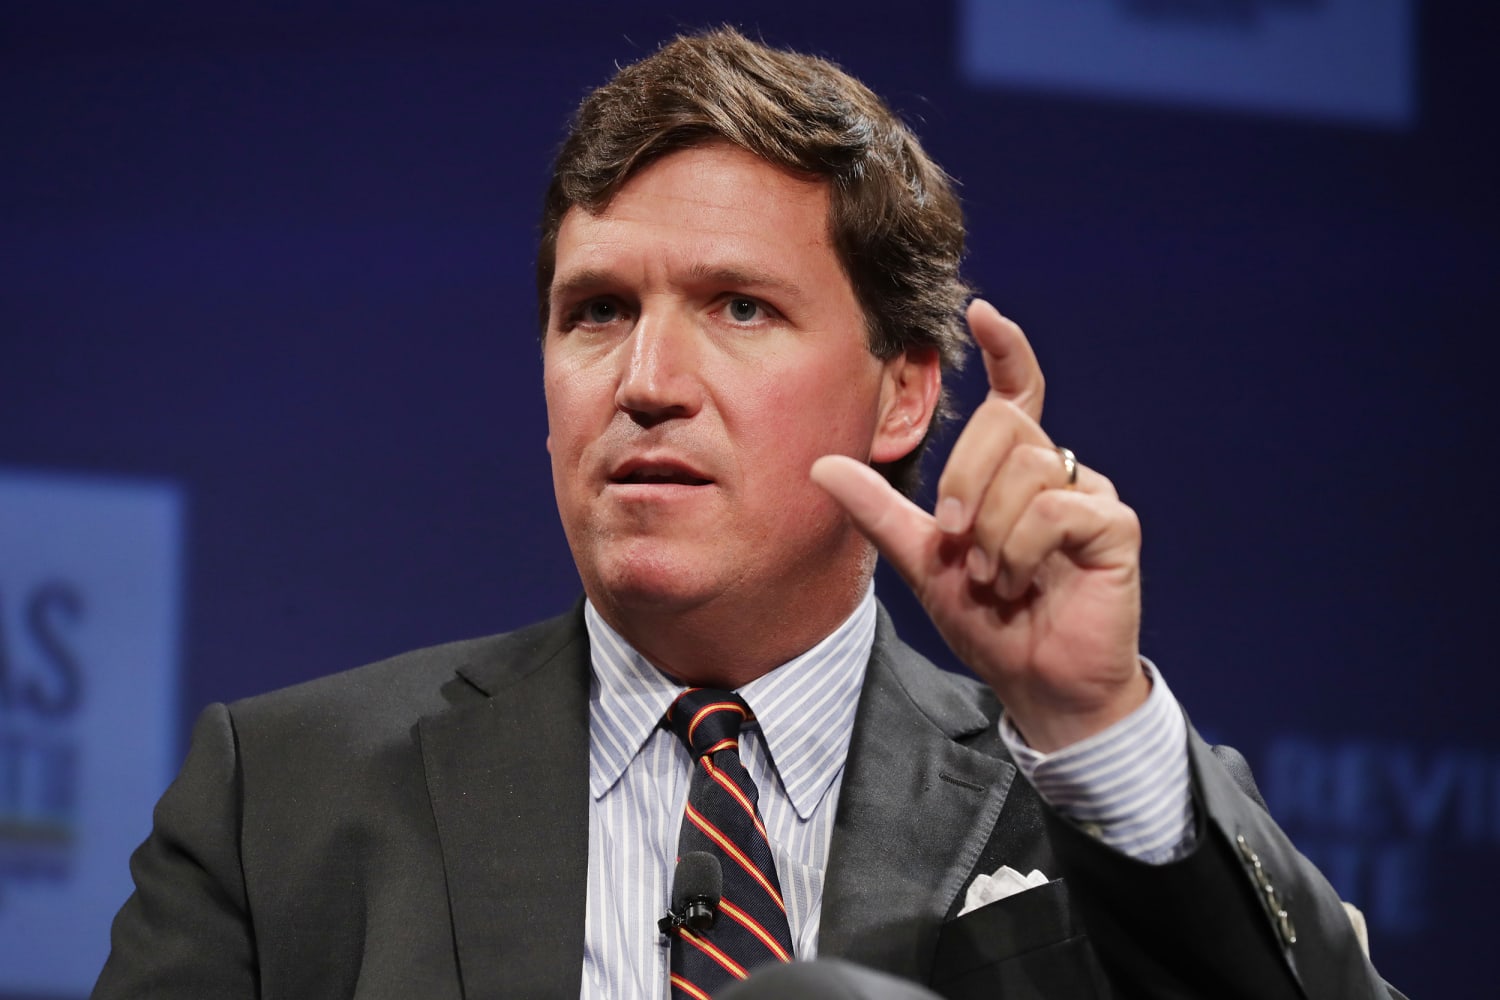 Why whale deaths are dividing environmentalists — and firing up Tucker  Carlson - POLITICO